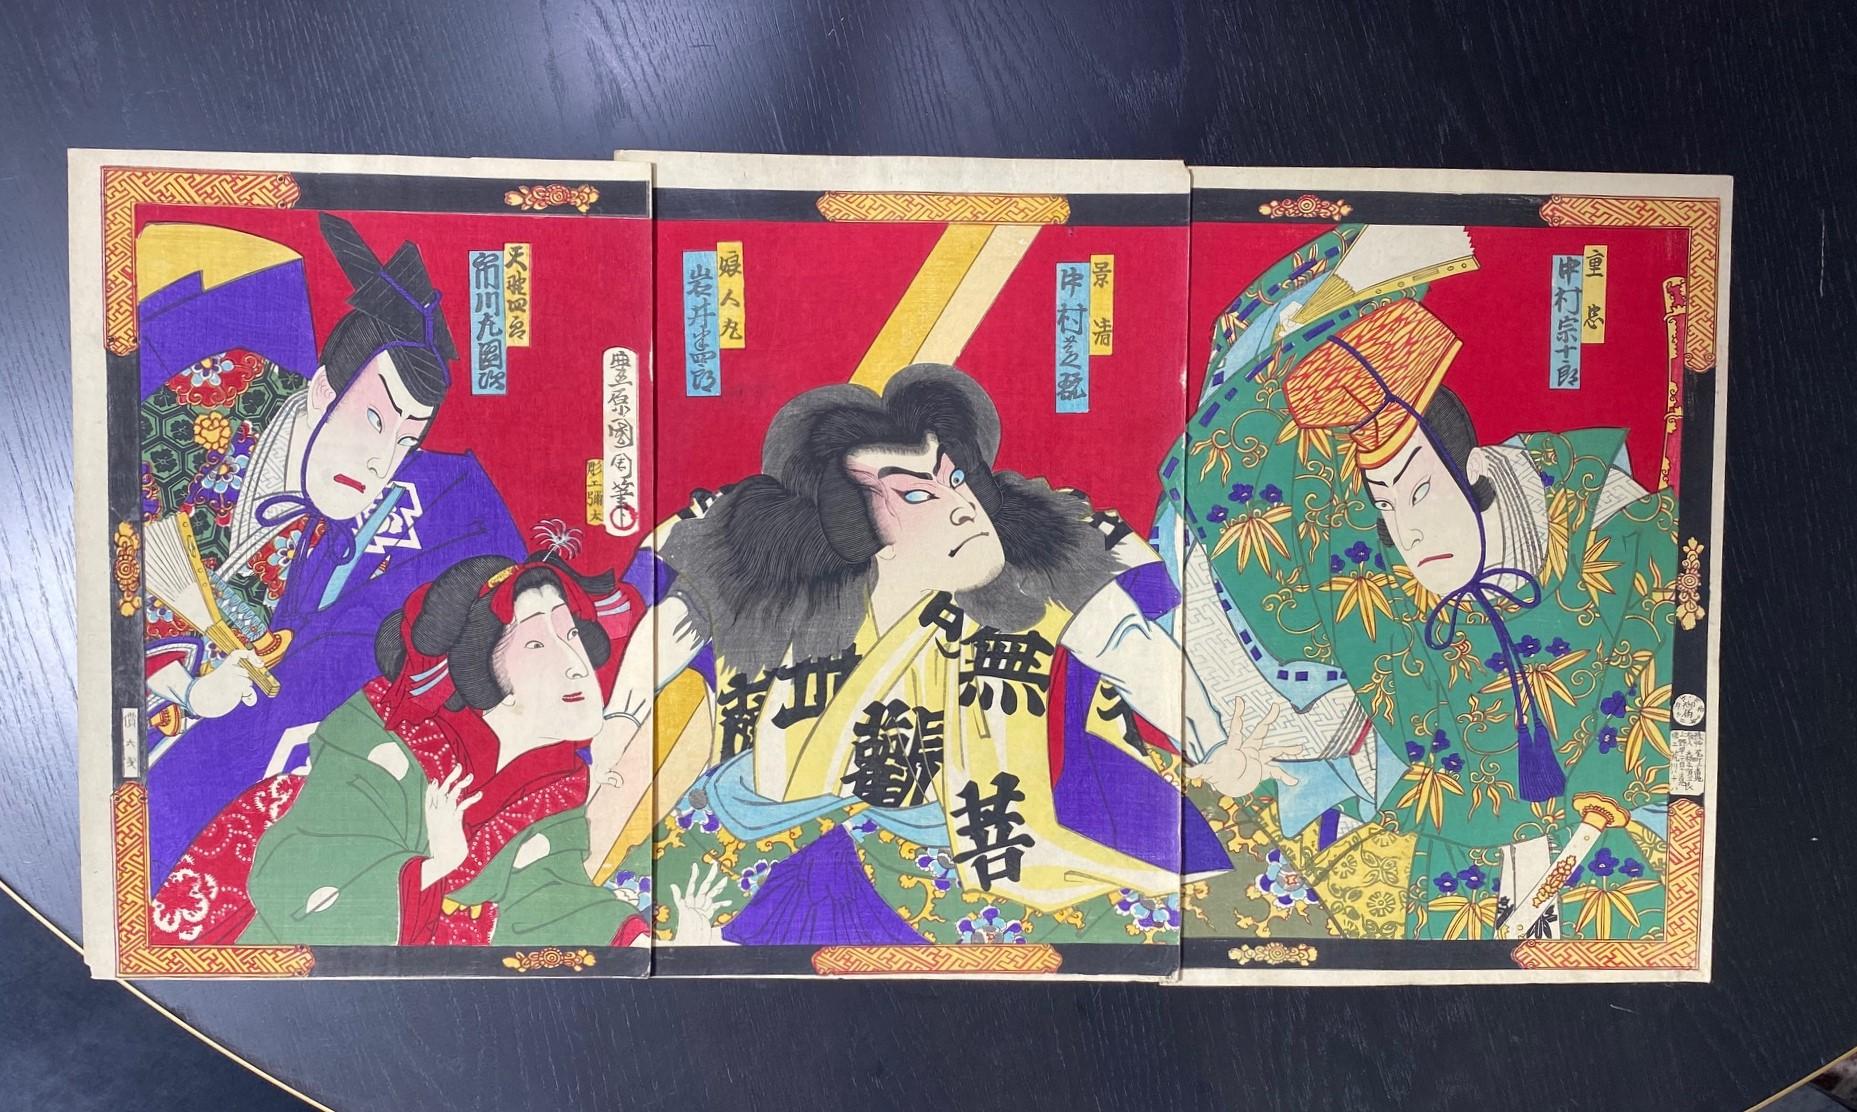 A wonderfully composed, beautifully, and richly colored triptych woodblock print by famed Japanese artist Toyohara Kunichika featuring four dramatic and quite intense Kabuki theatre actors.  The arresting and bold colors really make this scene